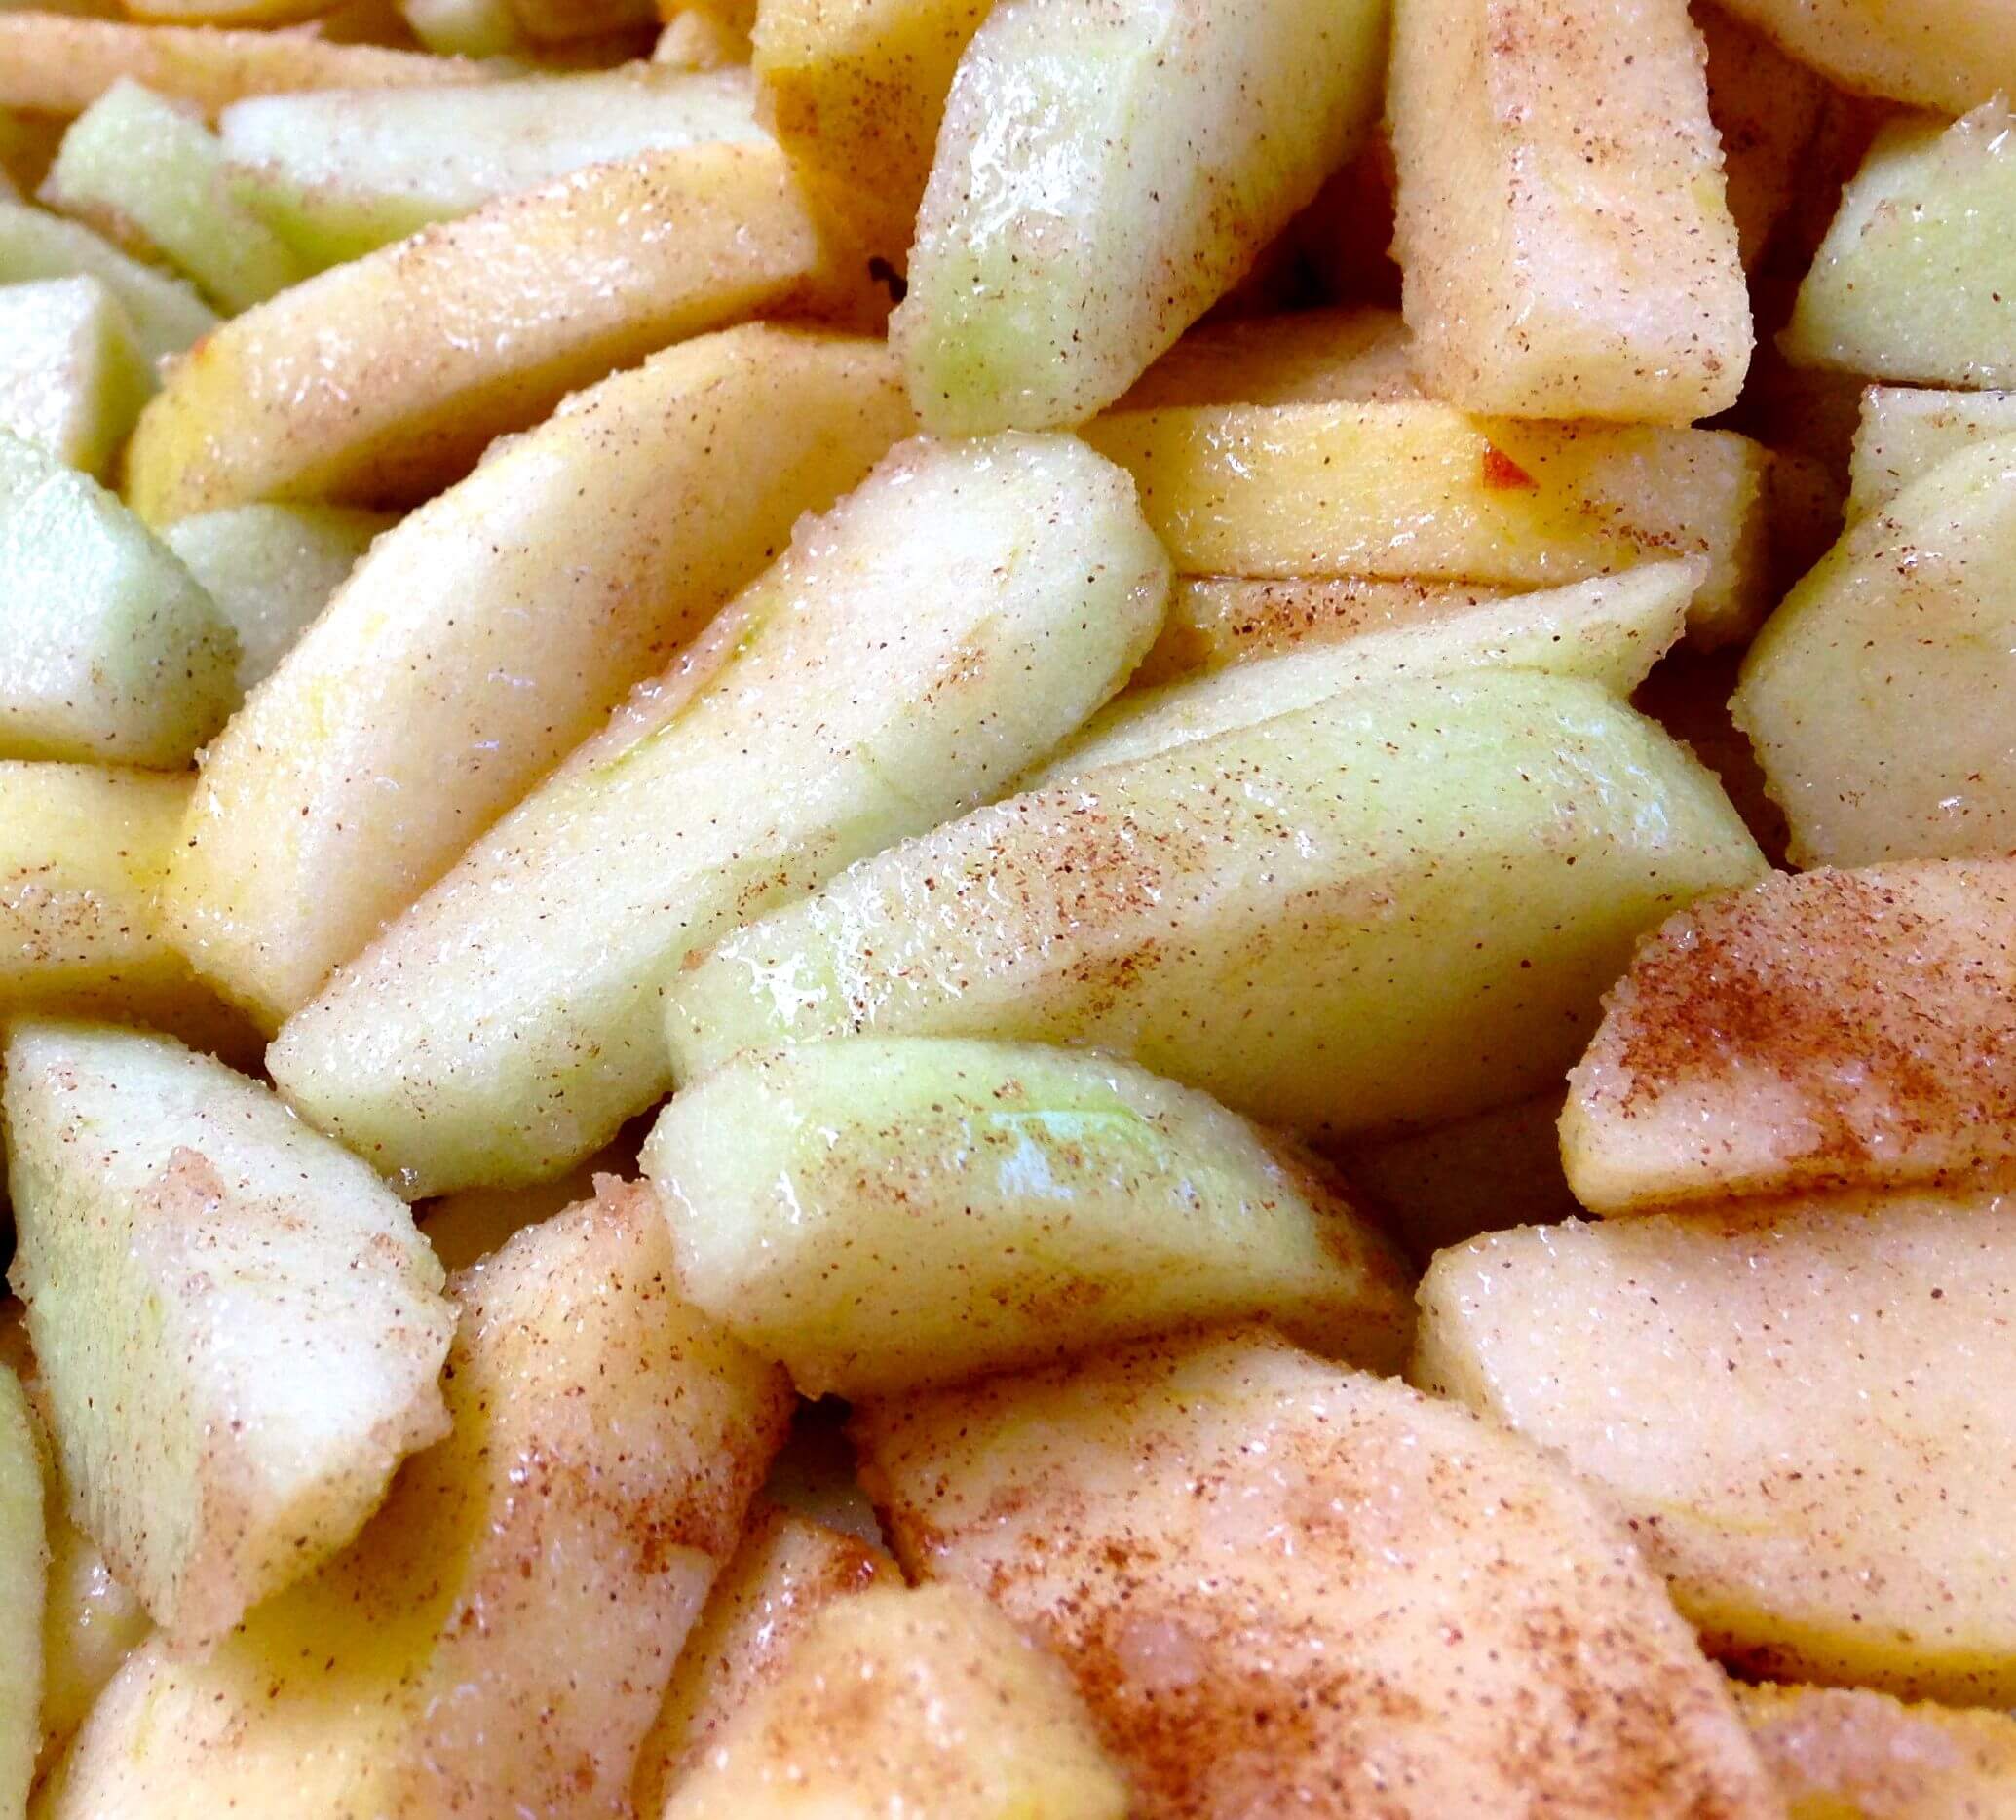 Thick slices of apple dusted with sugar and cinnamon